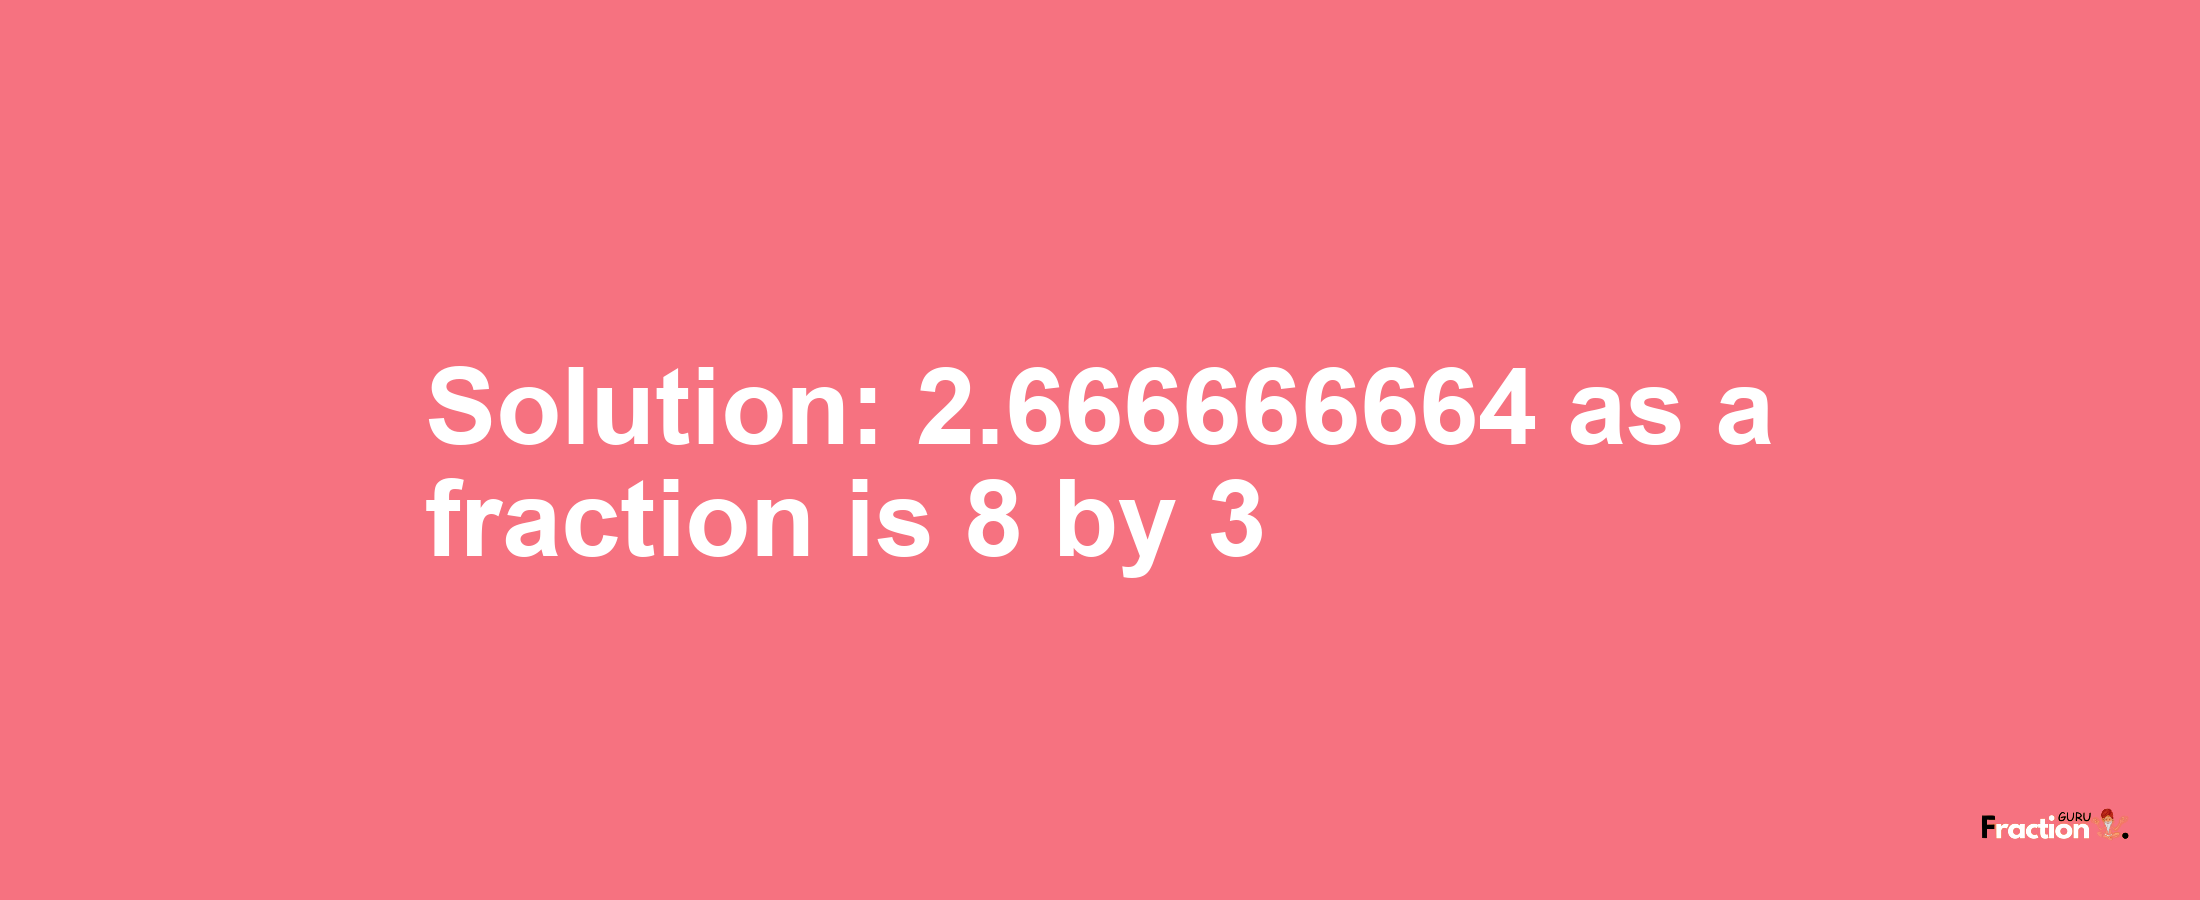 Solution:2.666666664 as a fraction is 8/3